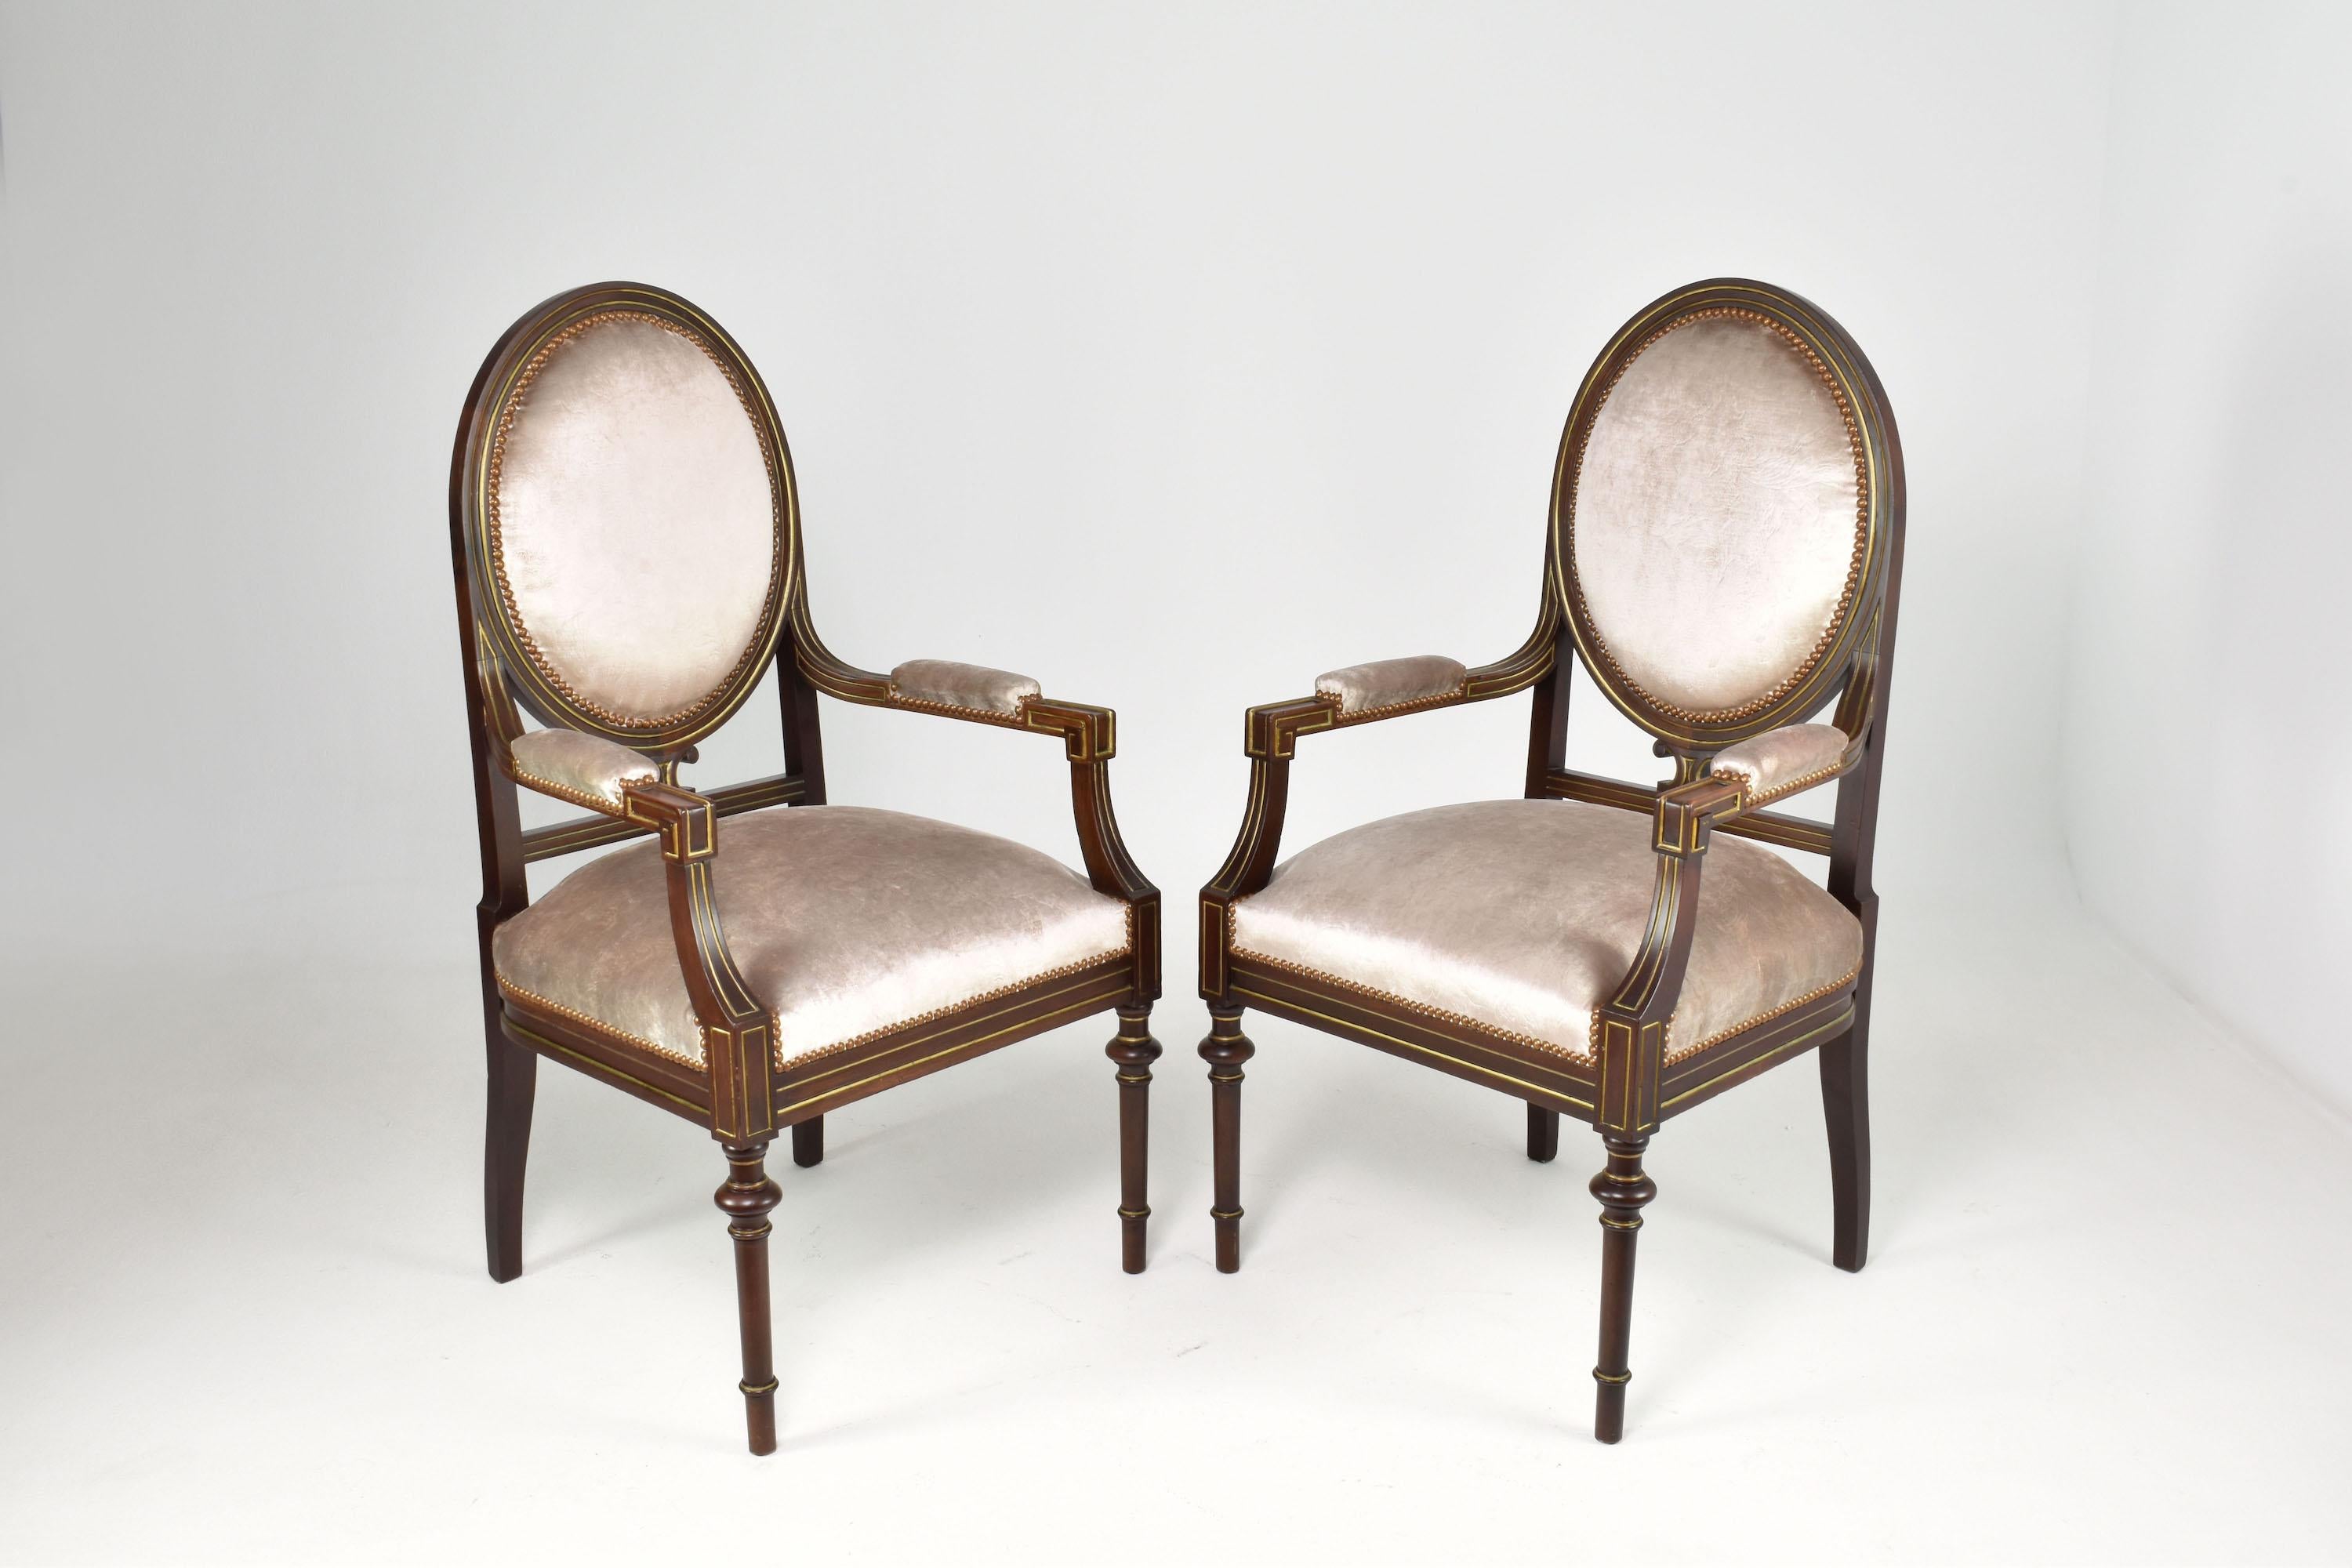 Introducing a pair of French Louis XVI-style chairs from the 1960s, restored by our atelier. These neoclassical armchairs showcase a flawless fusion of traditional elegance and contemporary refinement. They are crafted with a solid wood structure,